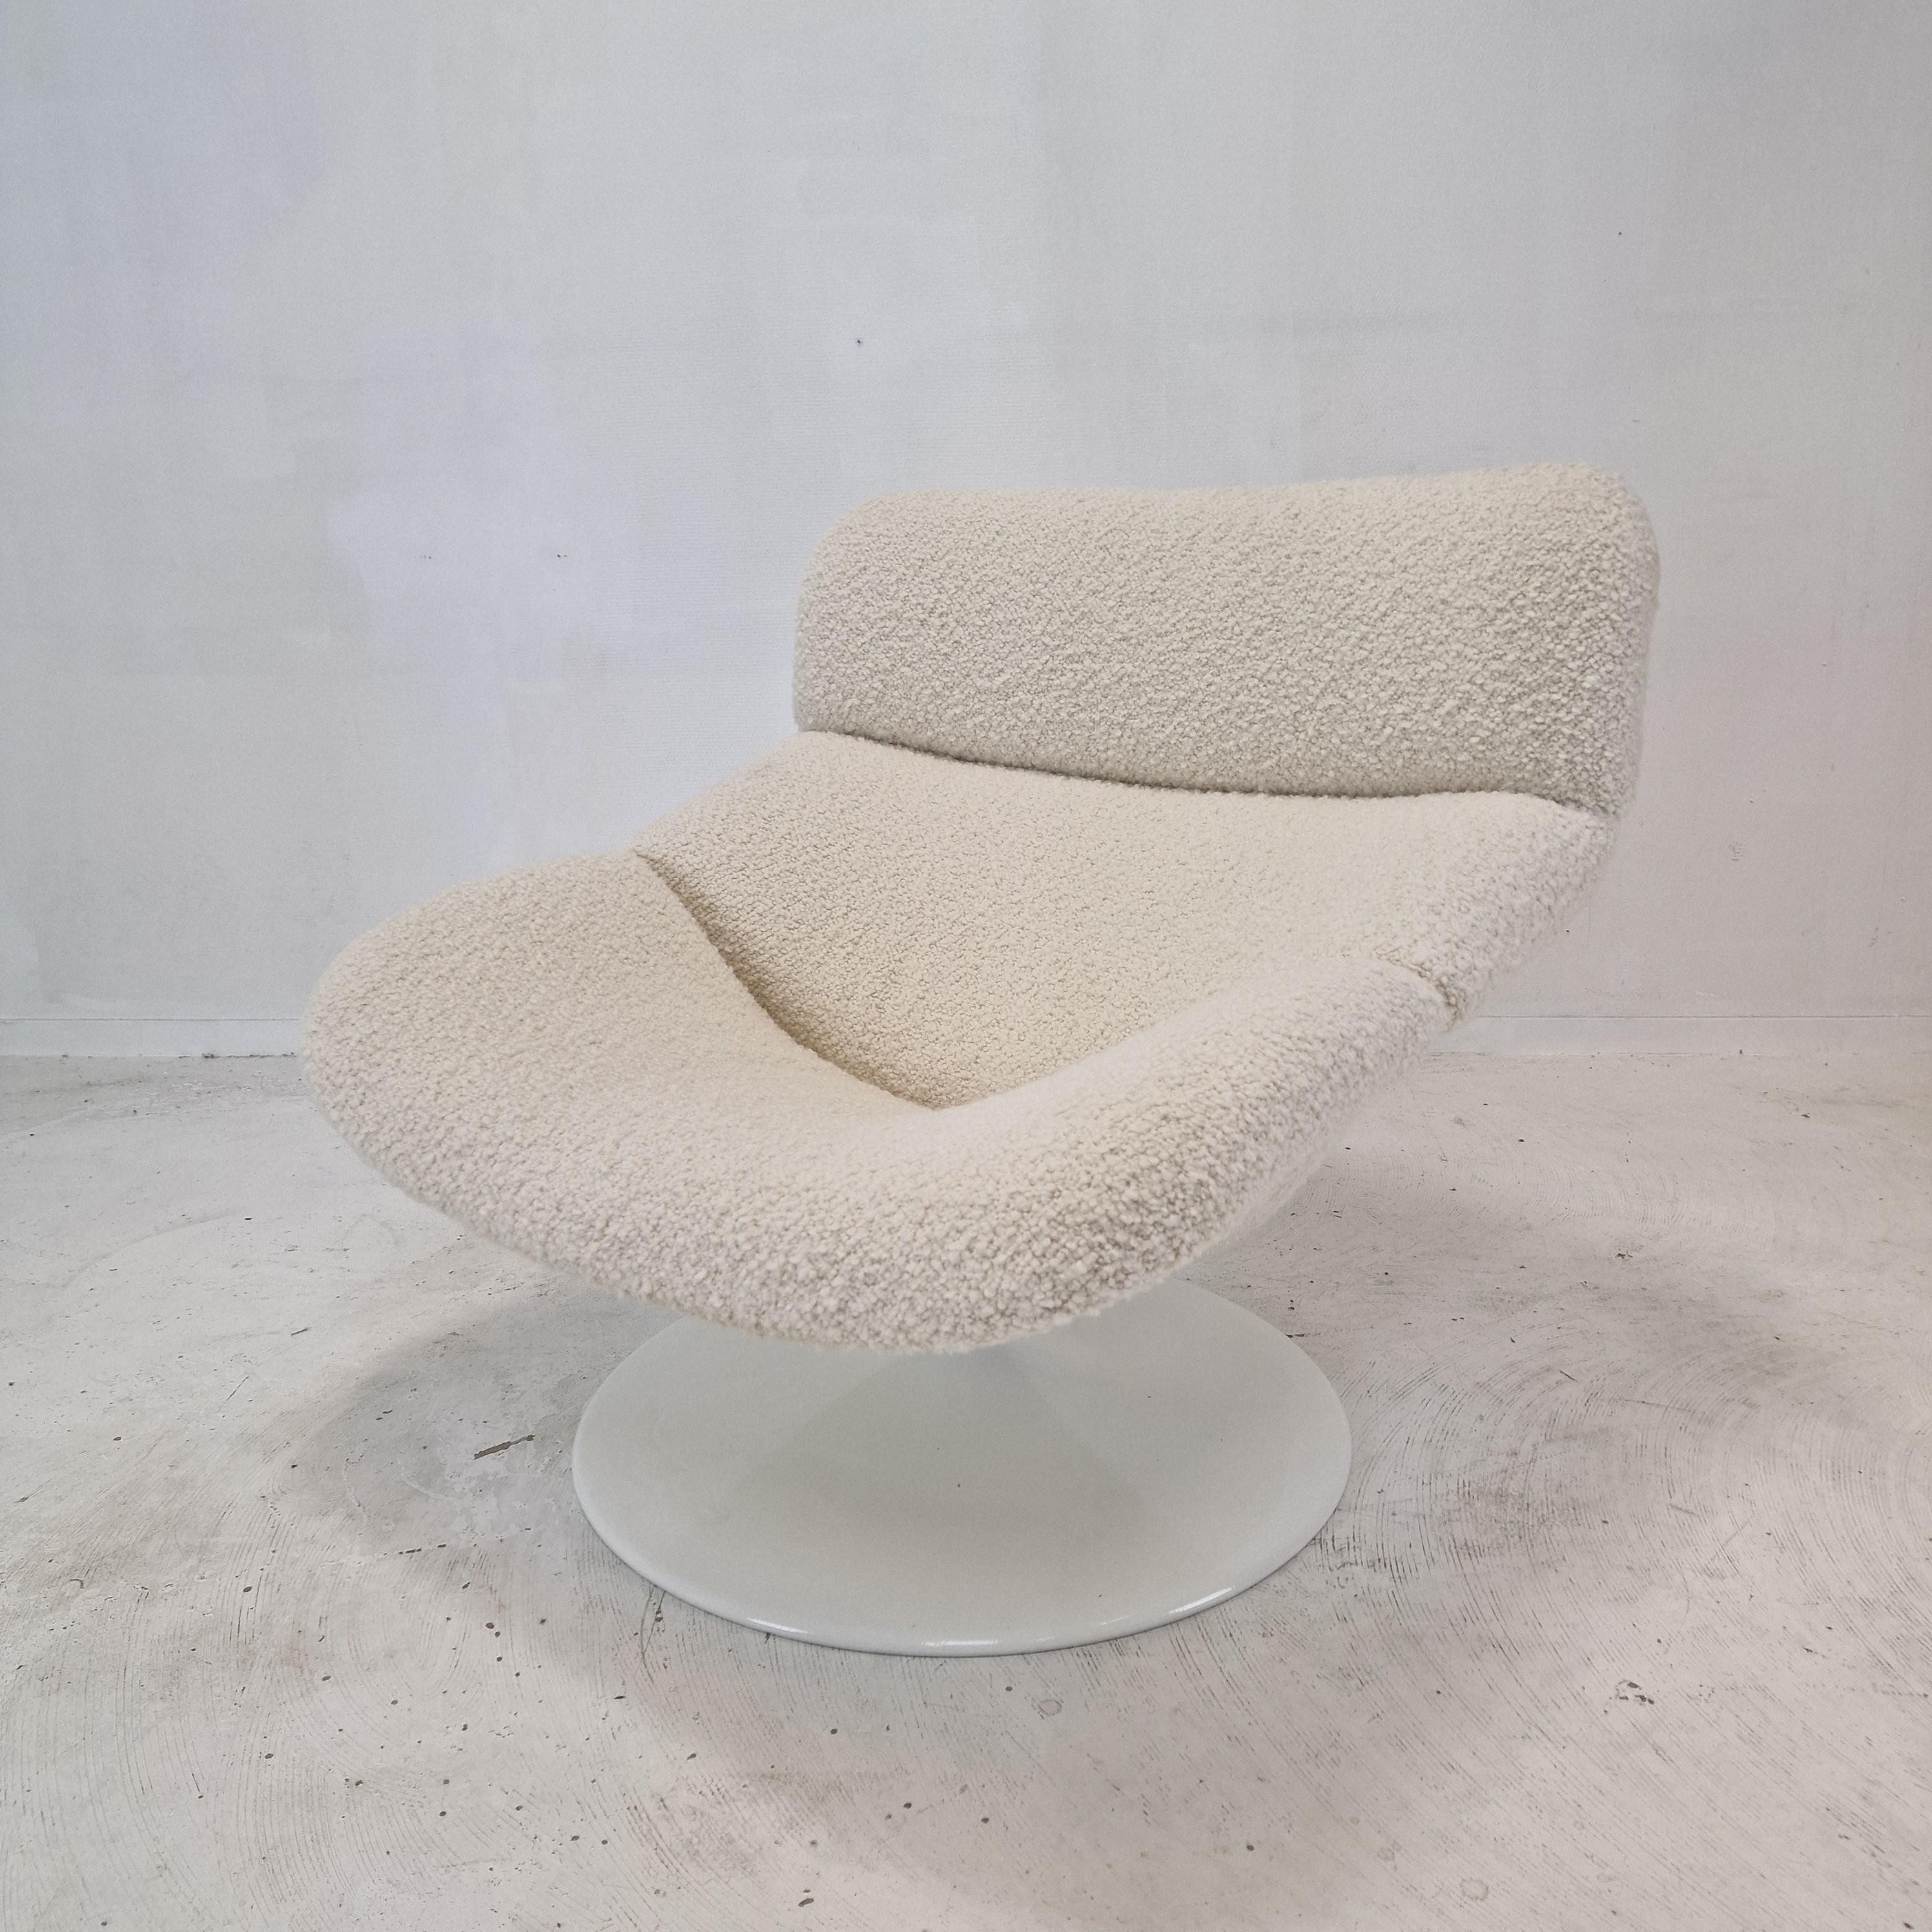 Extremely comfortable Artifort F518 lounge chair. 
Designed by the famous English designer Geoffrey Harcourt in the 70's. 

Very solid wooden frame with a large pivoting metal foot.

The chair is just upholstered with very nice bouclé fabric